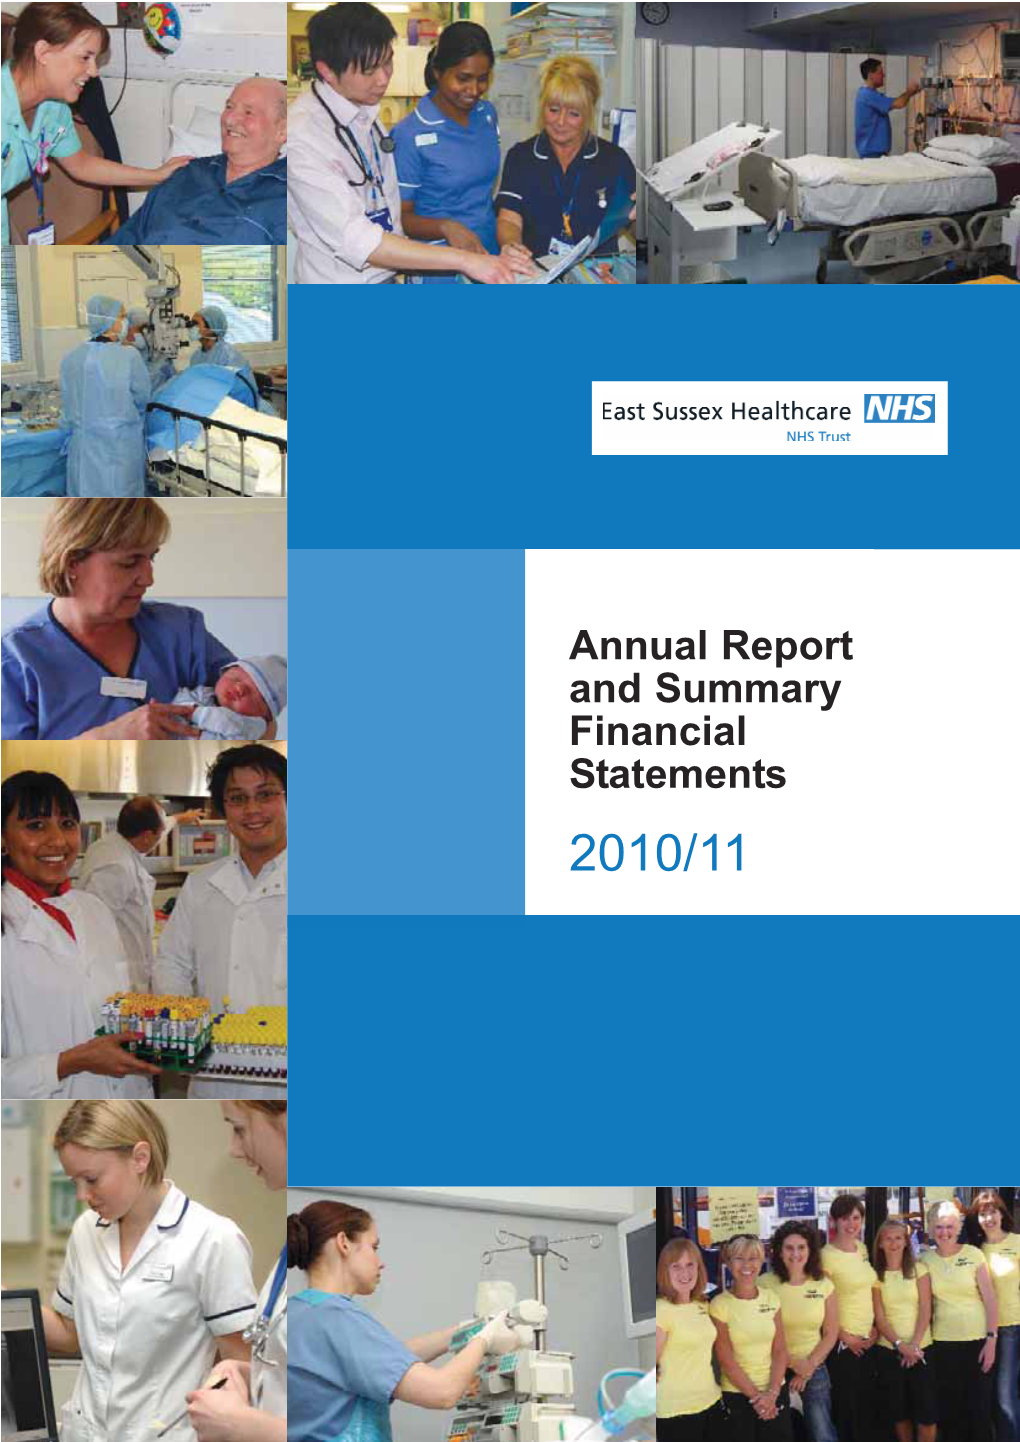 Annual Report and Summary Financial Statements – 2010/11